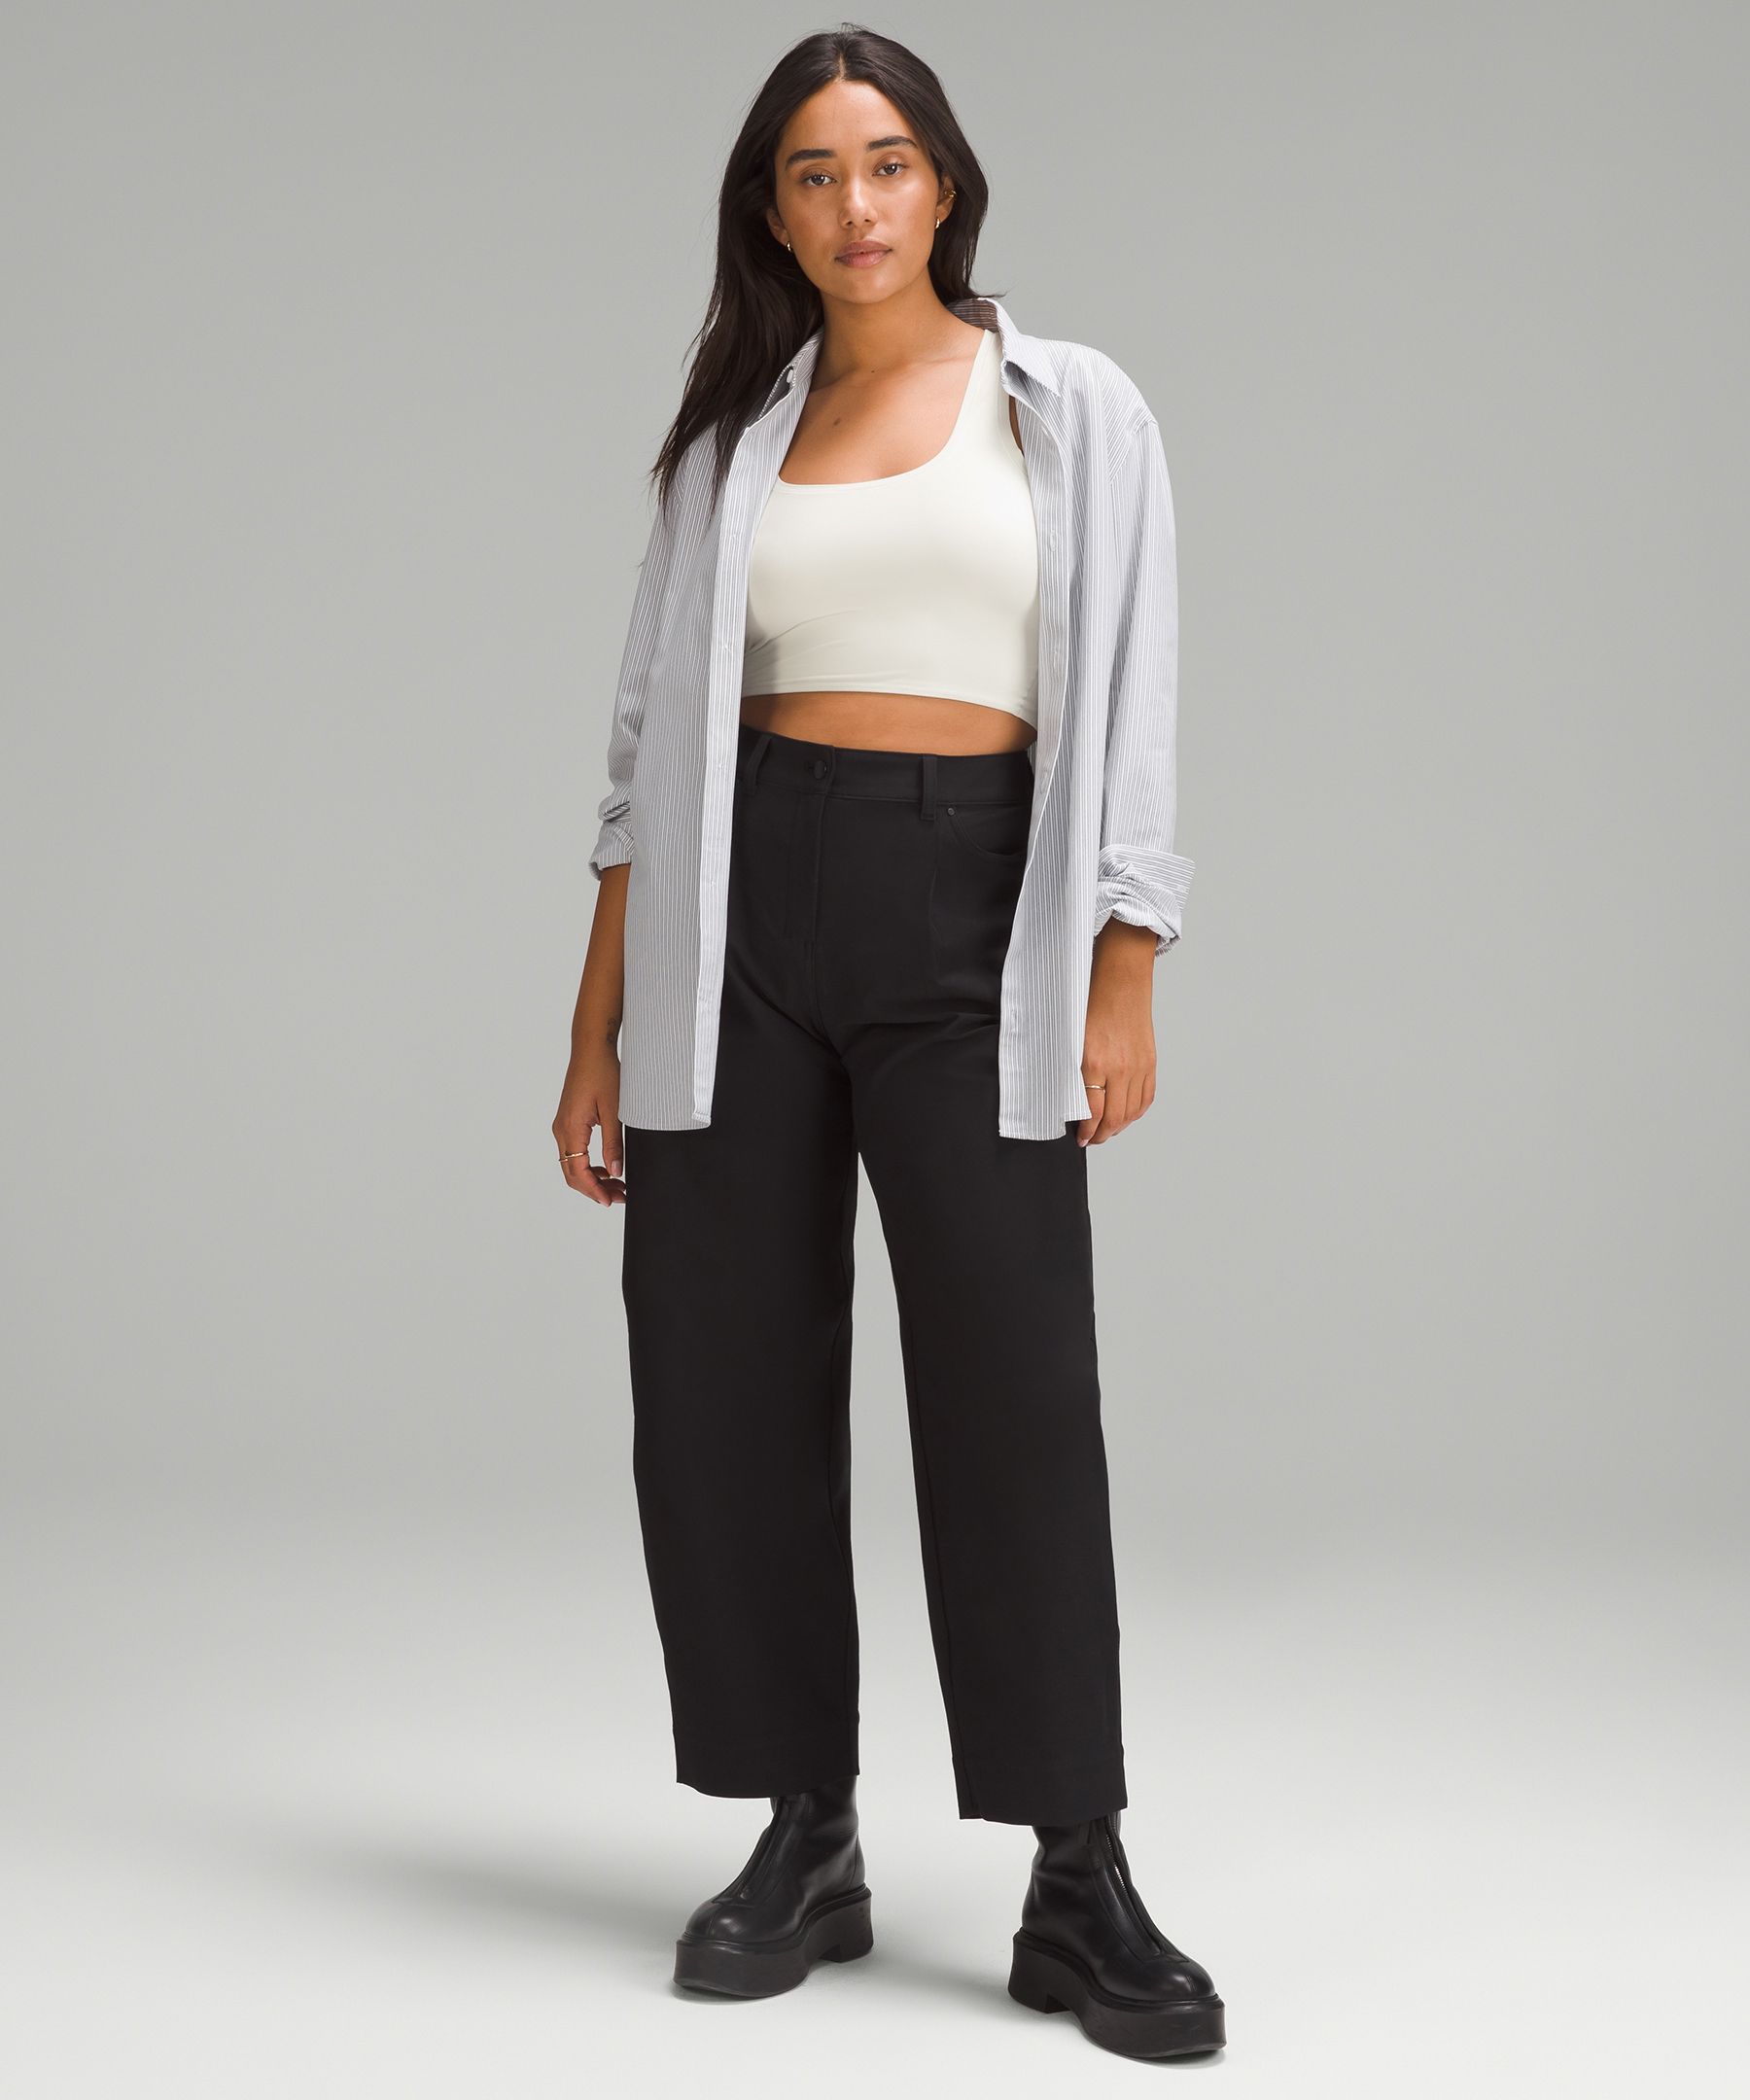 The lululemon Wundermost Collection Is Out Now - PureWow